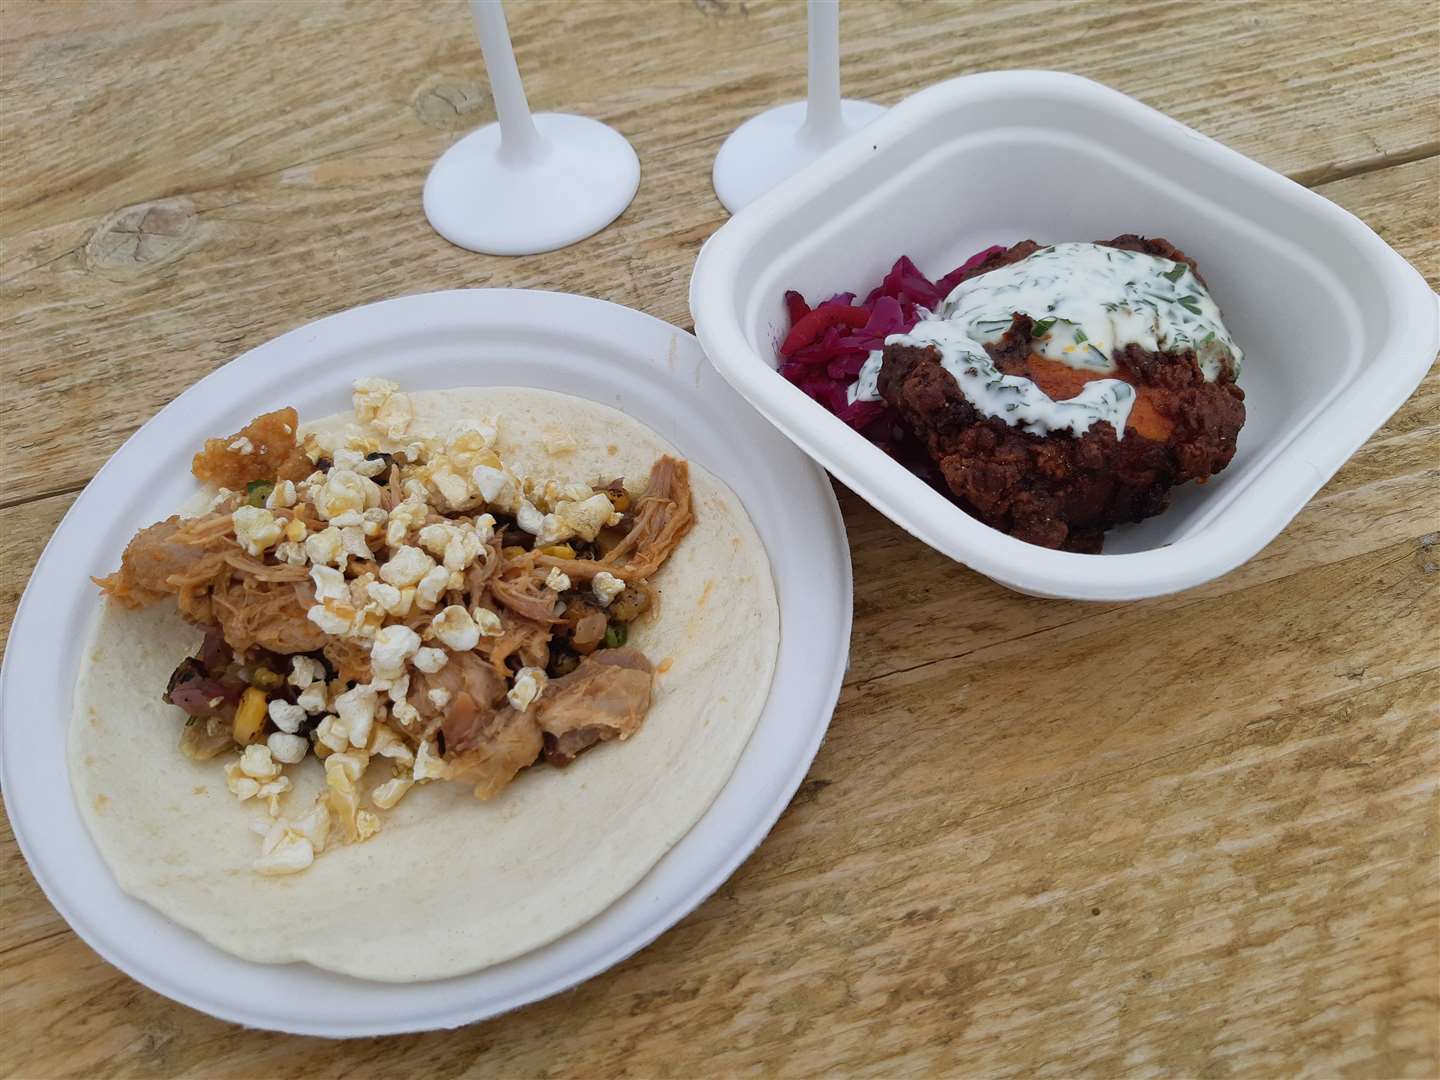 Smoked hog taco and Kerridge's fried chicken from the Hand & Flowers